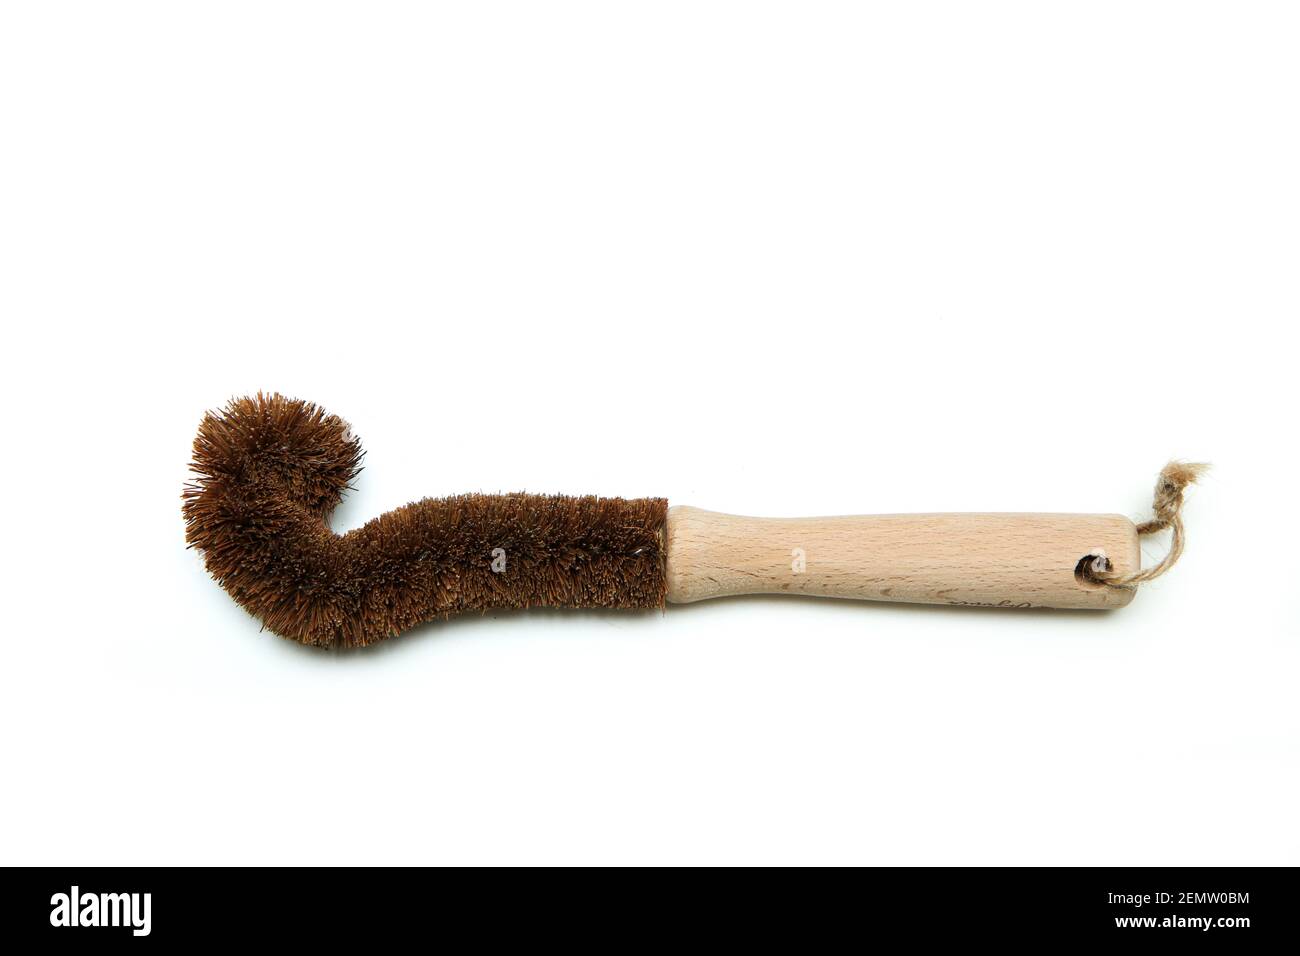 A cleaning brush for bottles made from natural materials. Made from wood and natural bristles. Isolated on a white background. Stock Photo